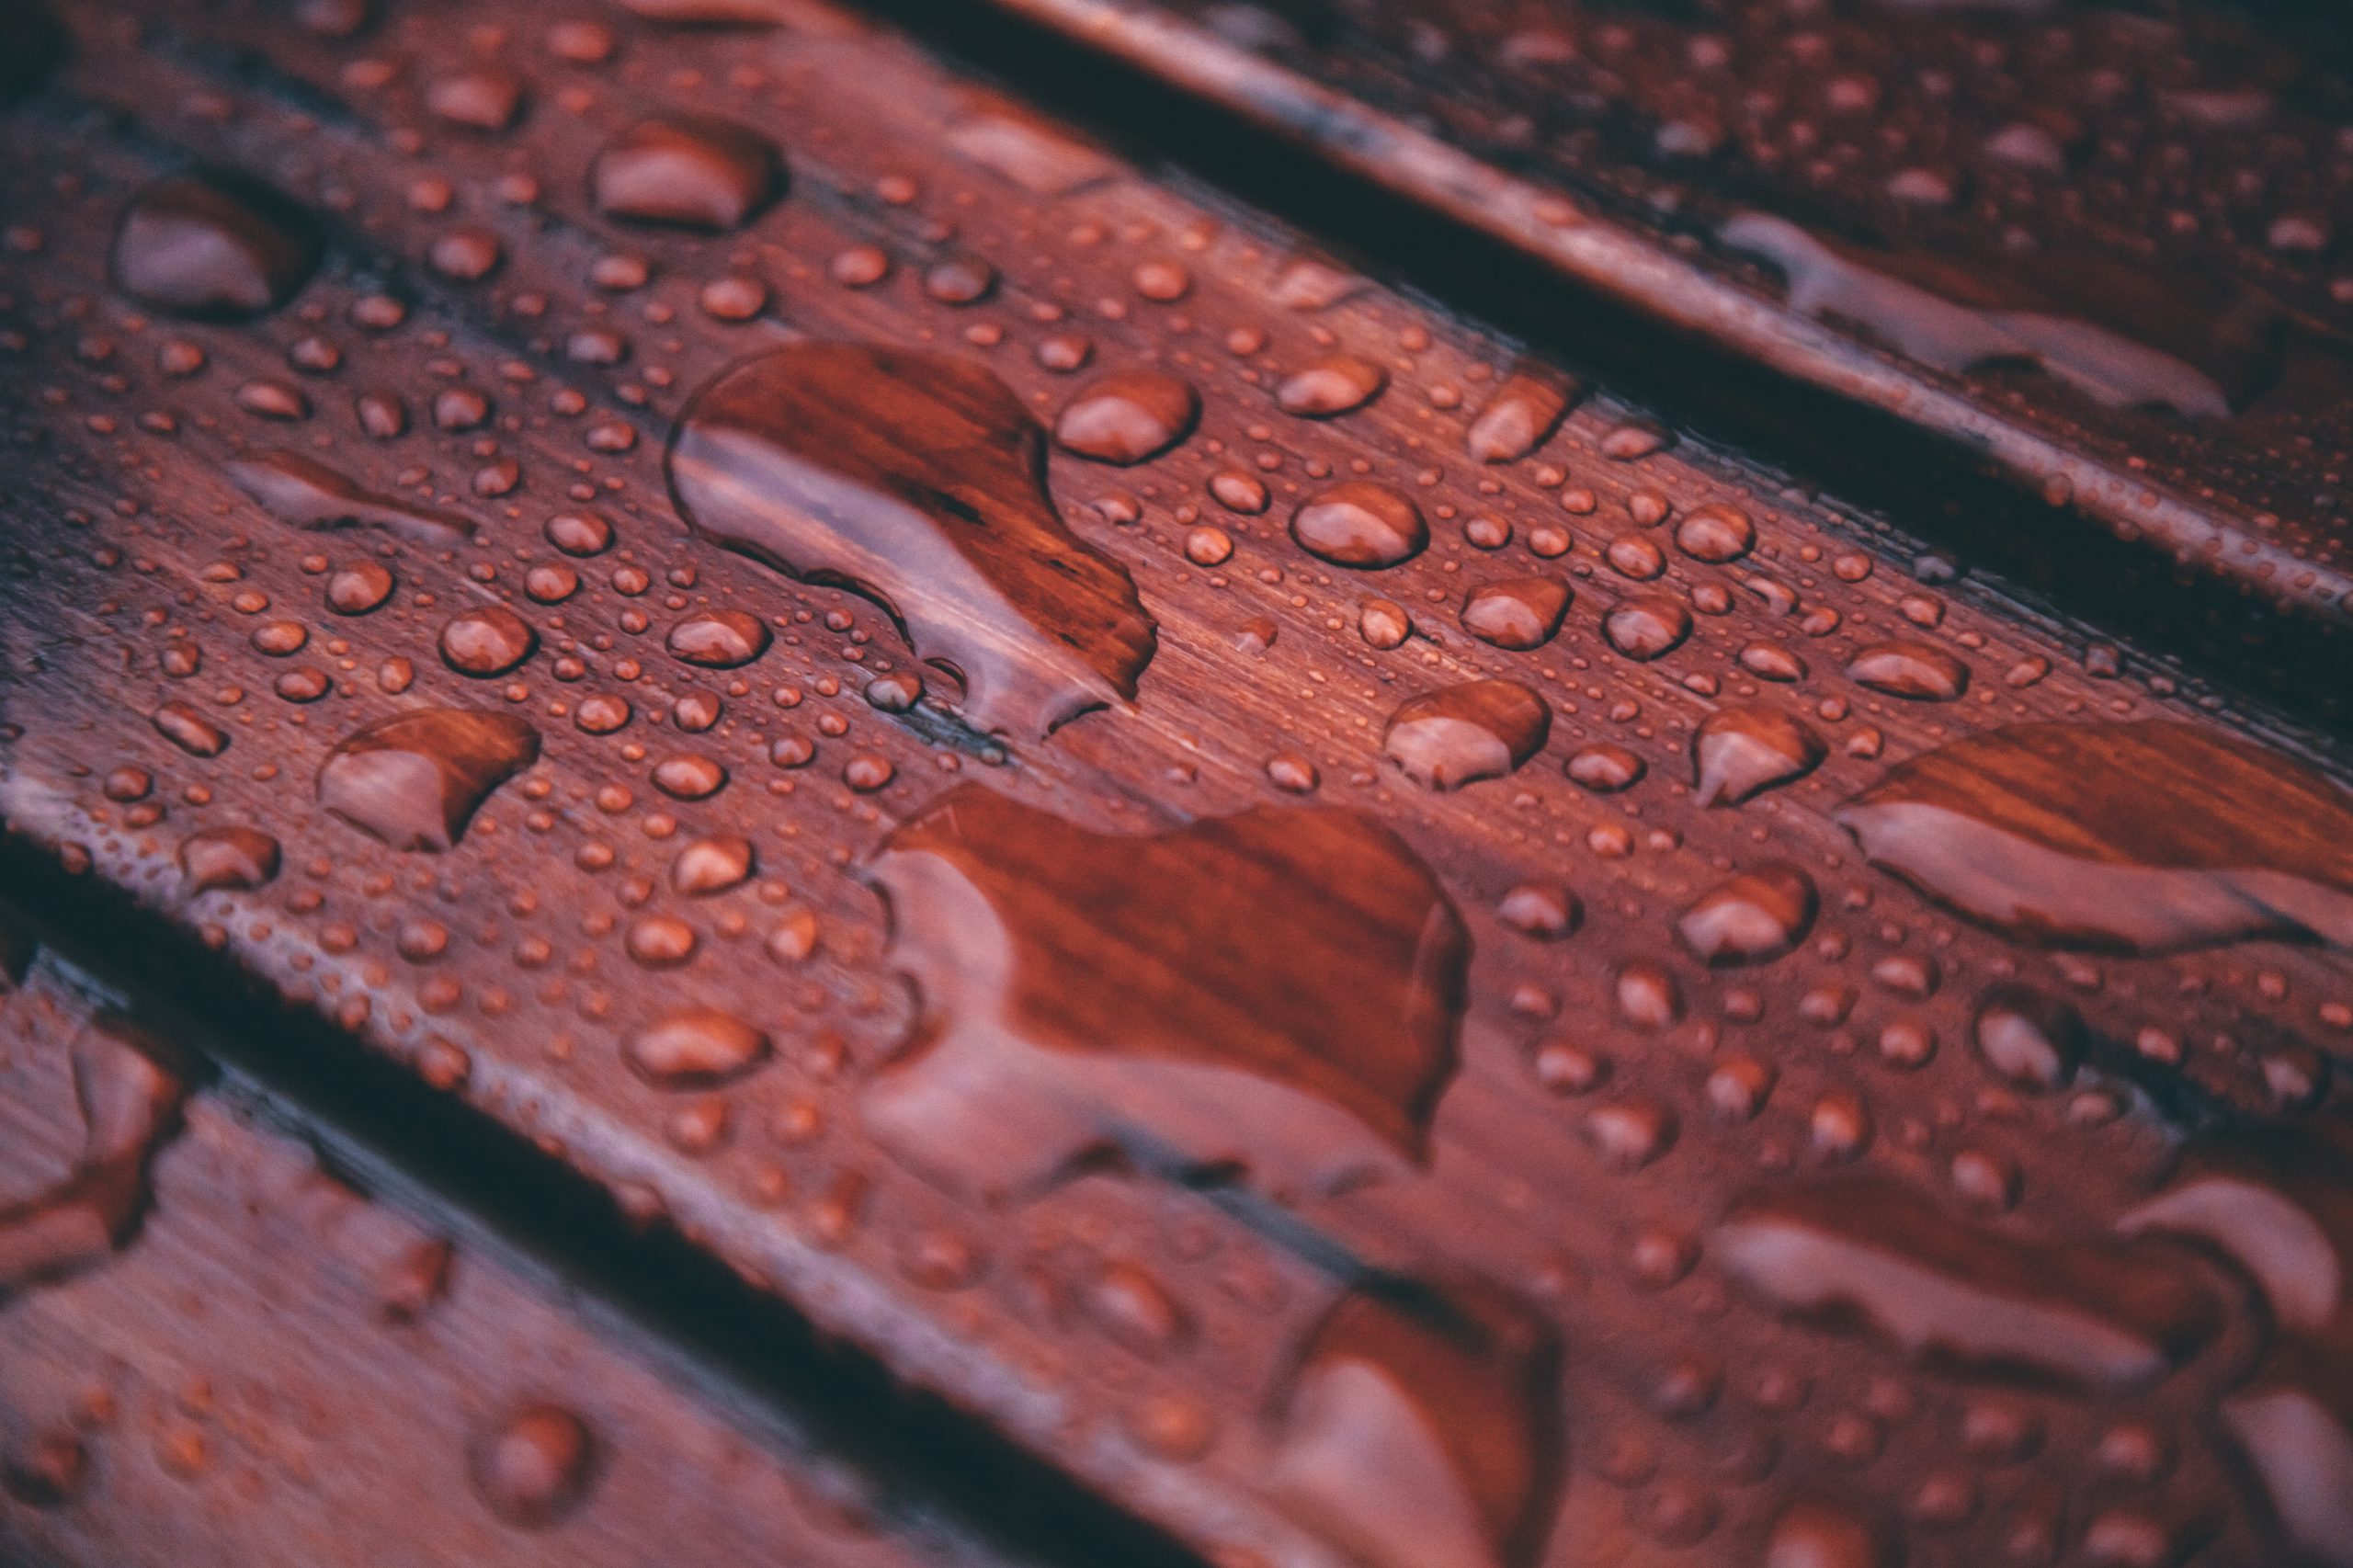 Rain drops collect on brownish red wood